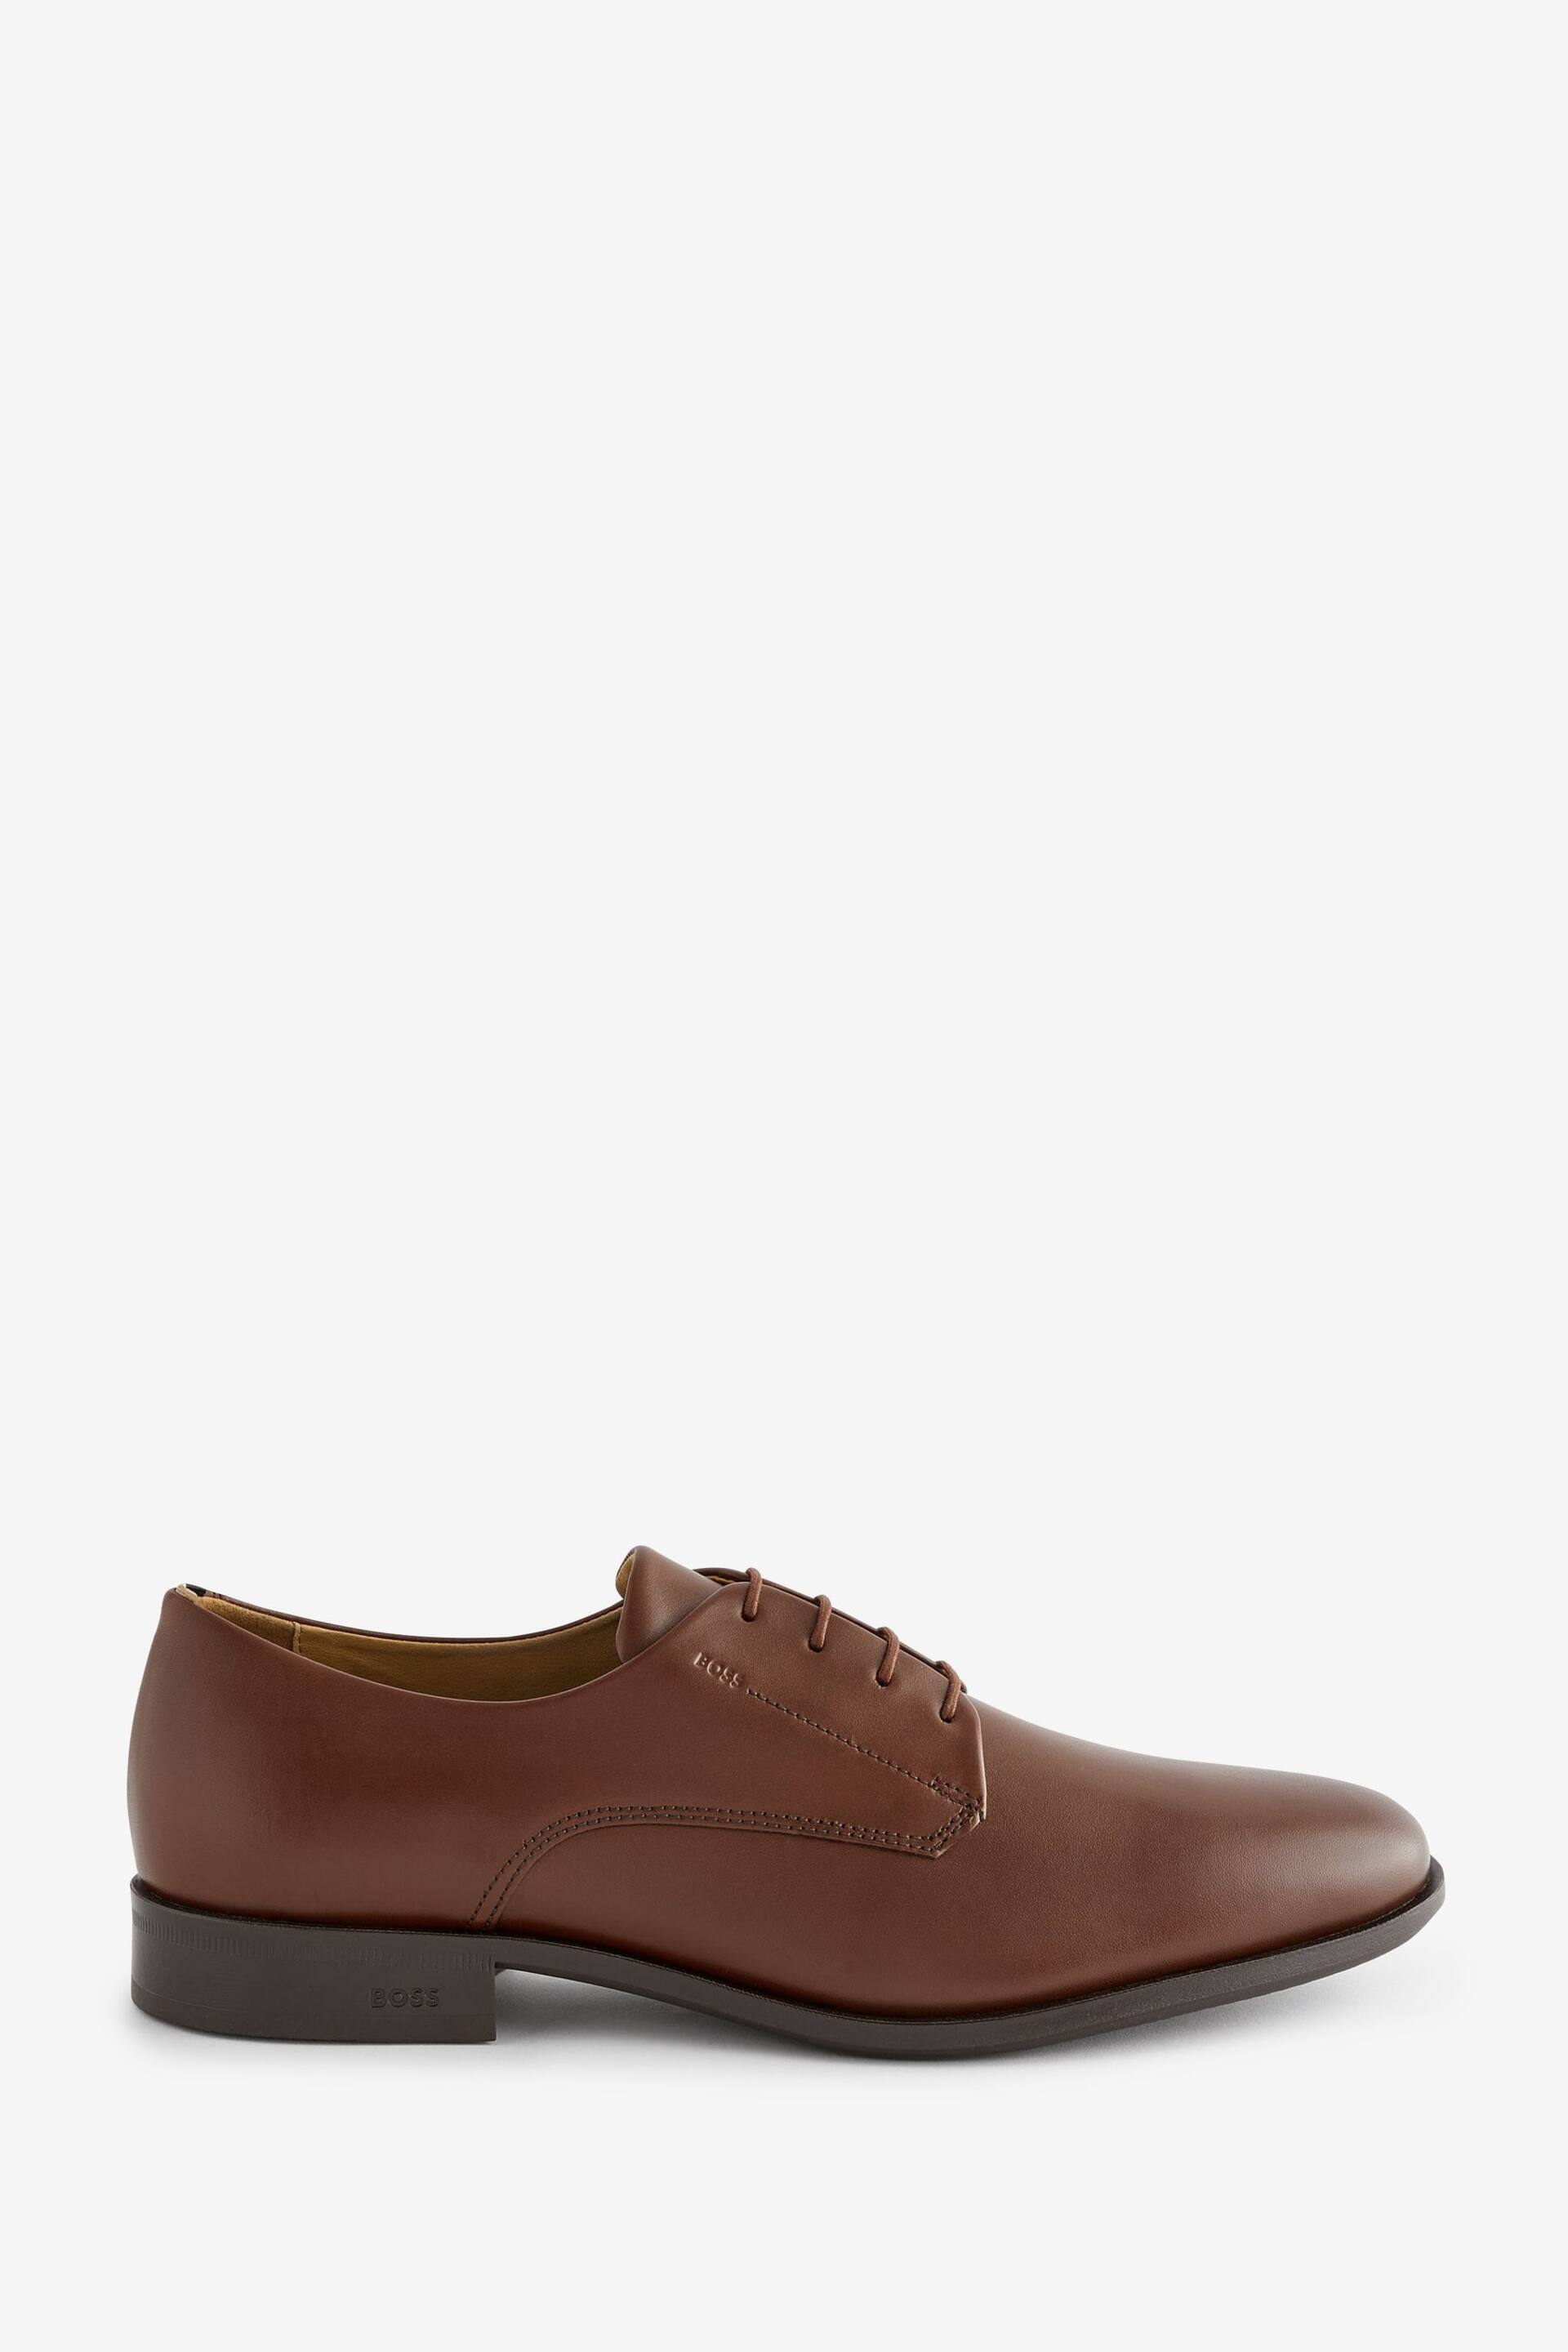 BOSS Brown Colby Shoes - Image 2 of 5